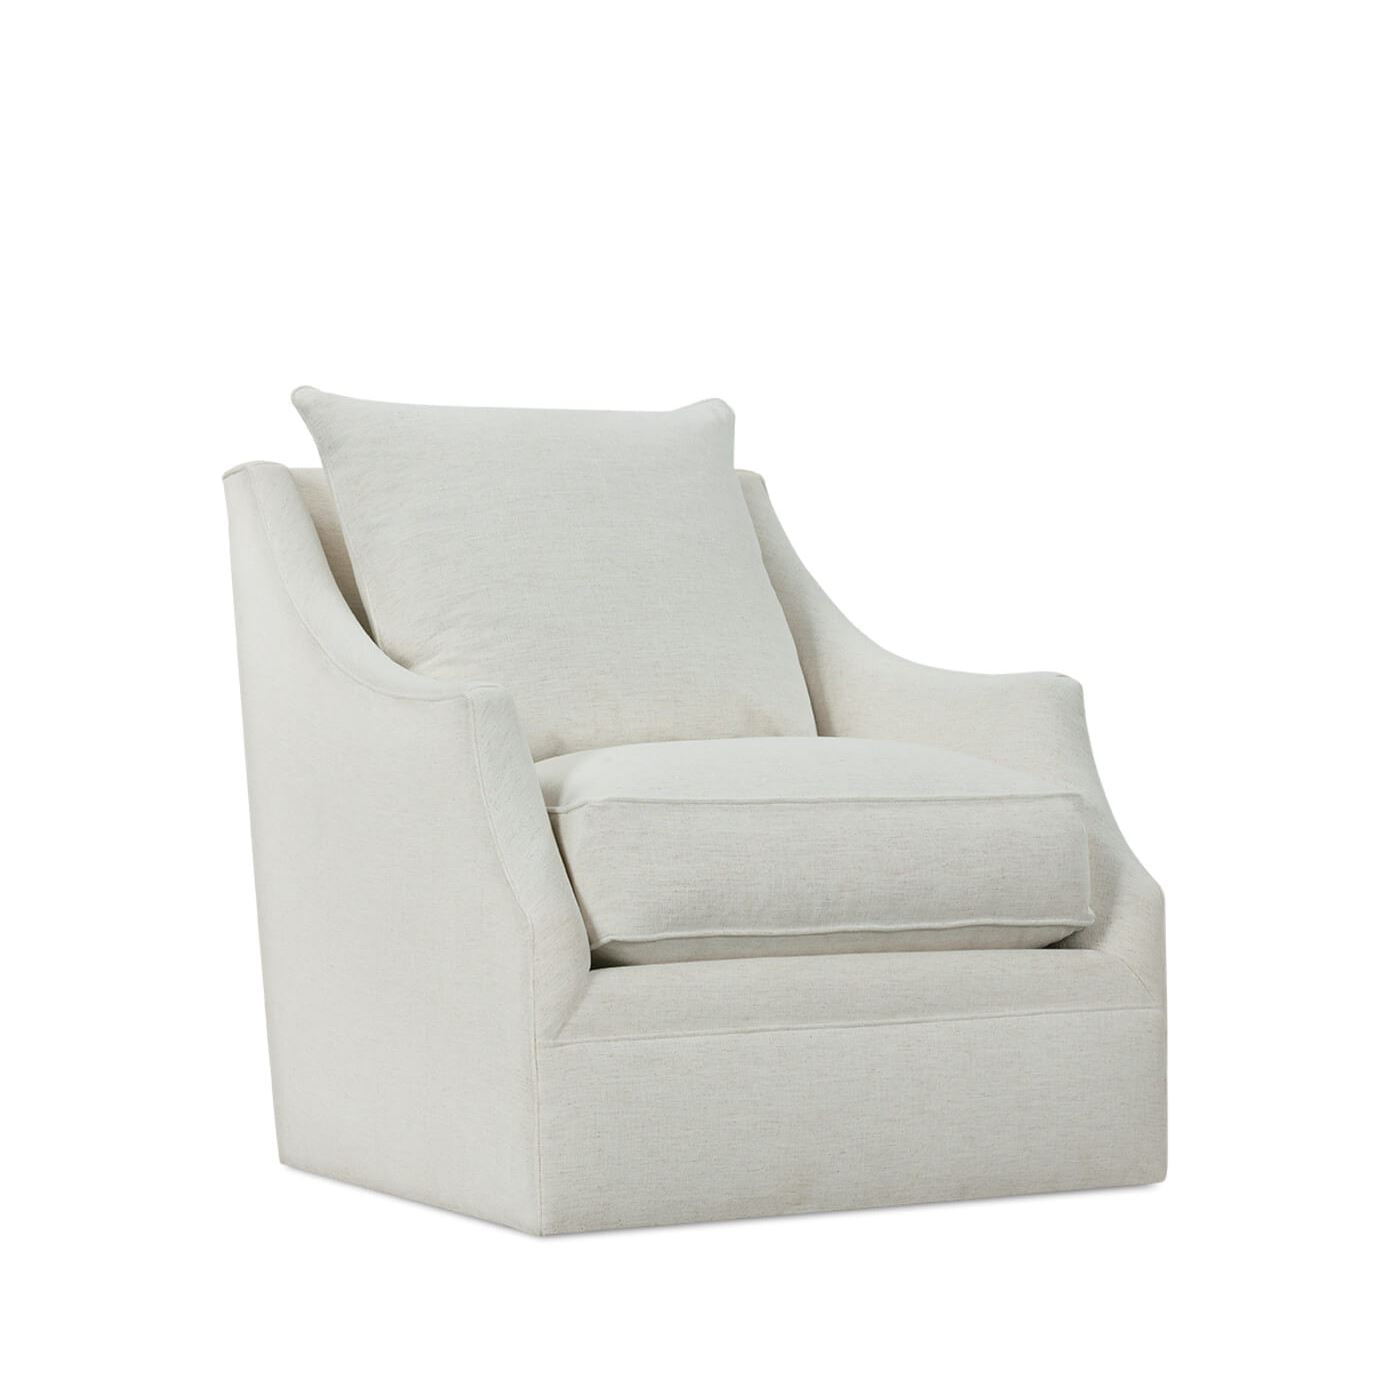 Kerrie Swivel Glider Chair in Nomad Snow by Huck & Peck SWIVEL GLIDER Huck and Peck